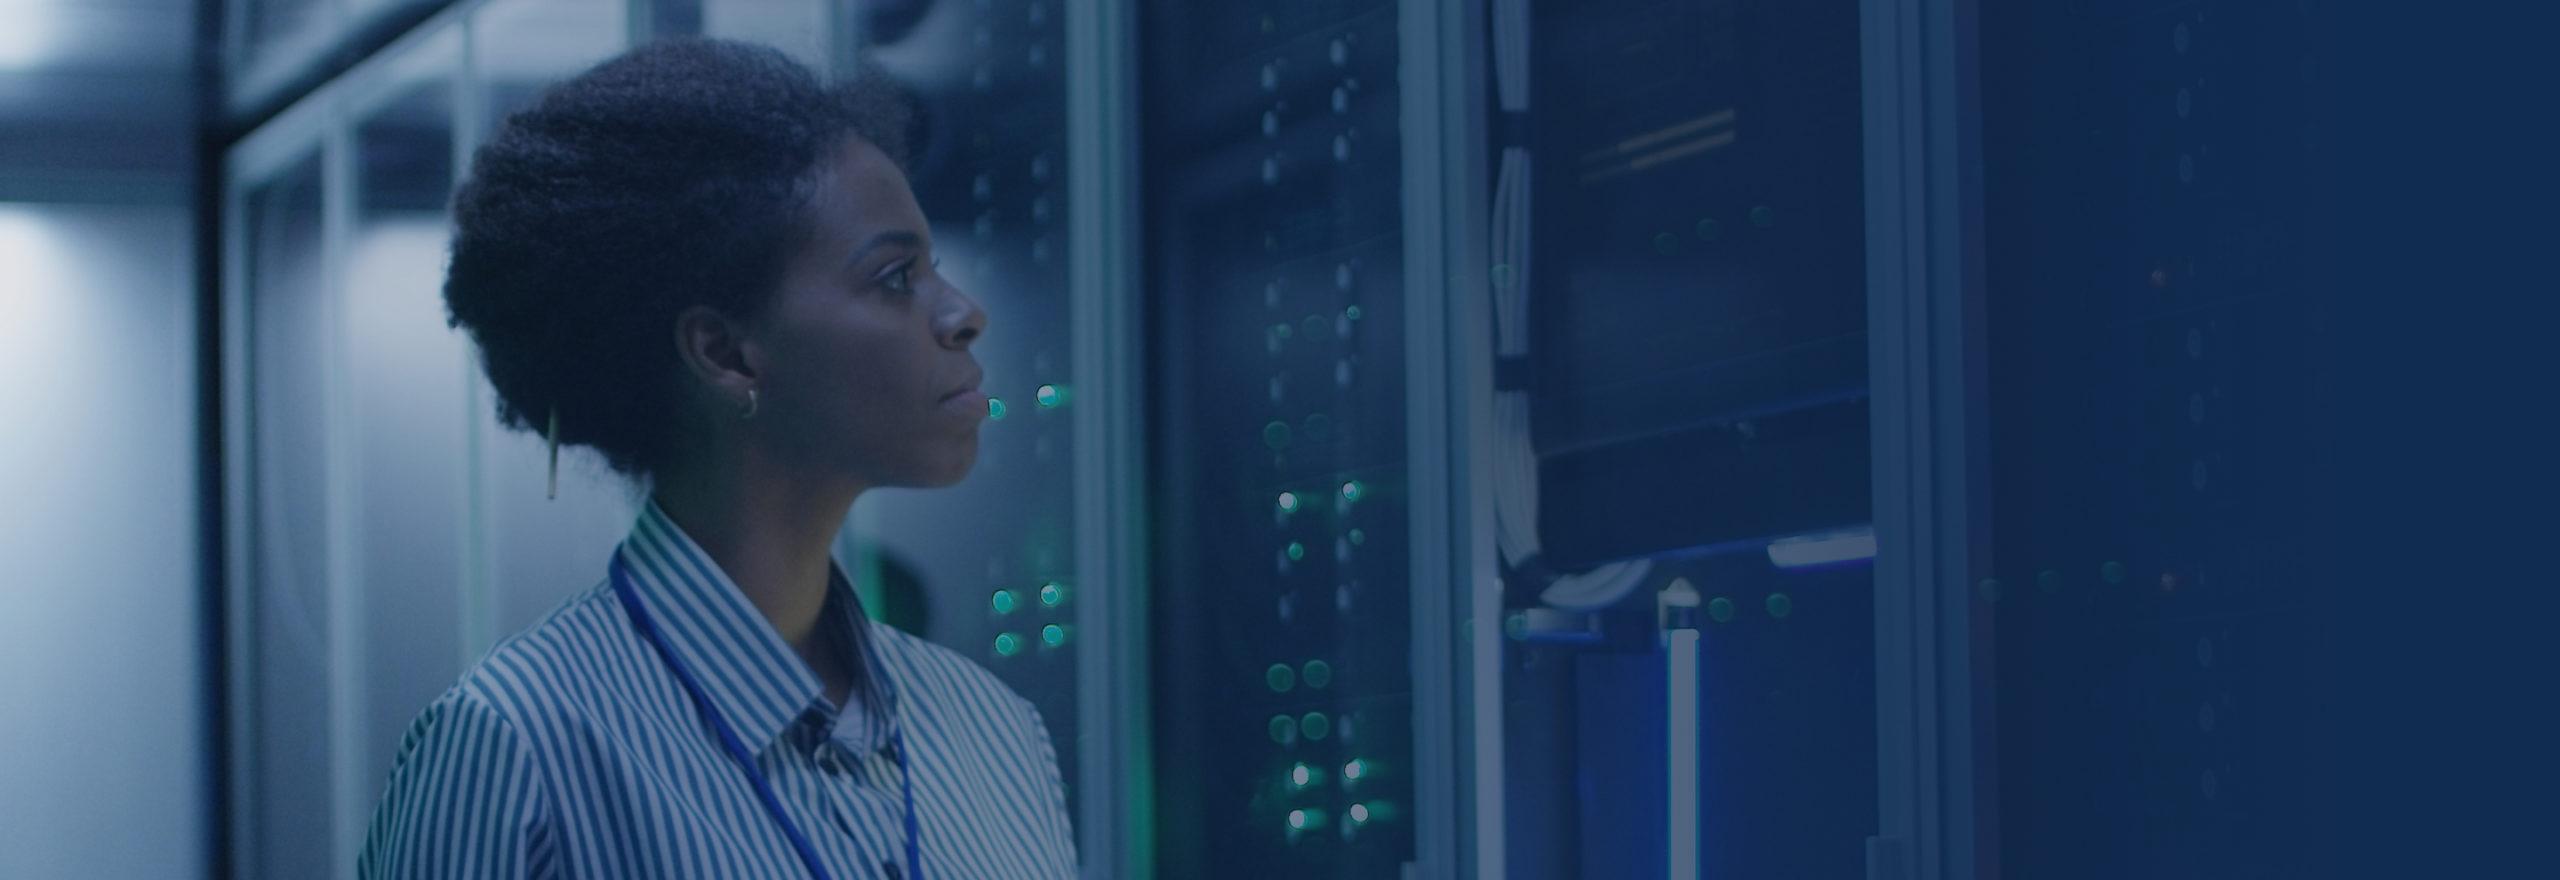 picture of woman providing network support and maintenance in data center